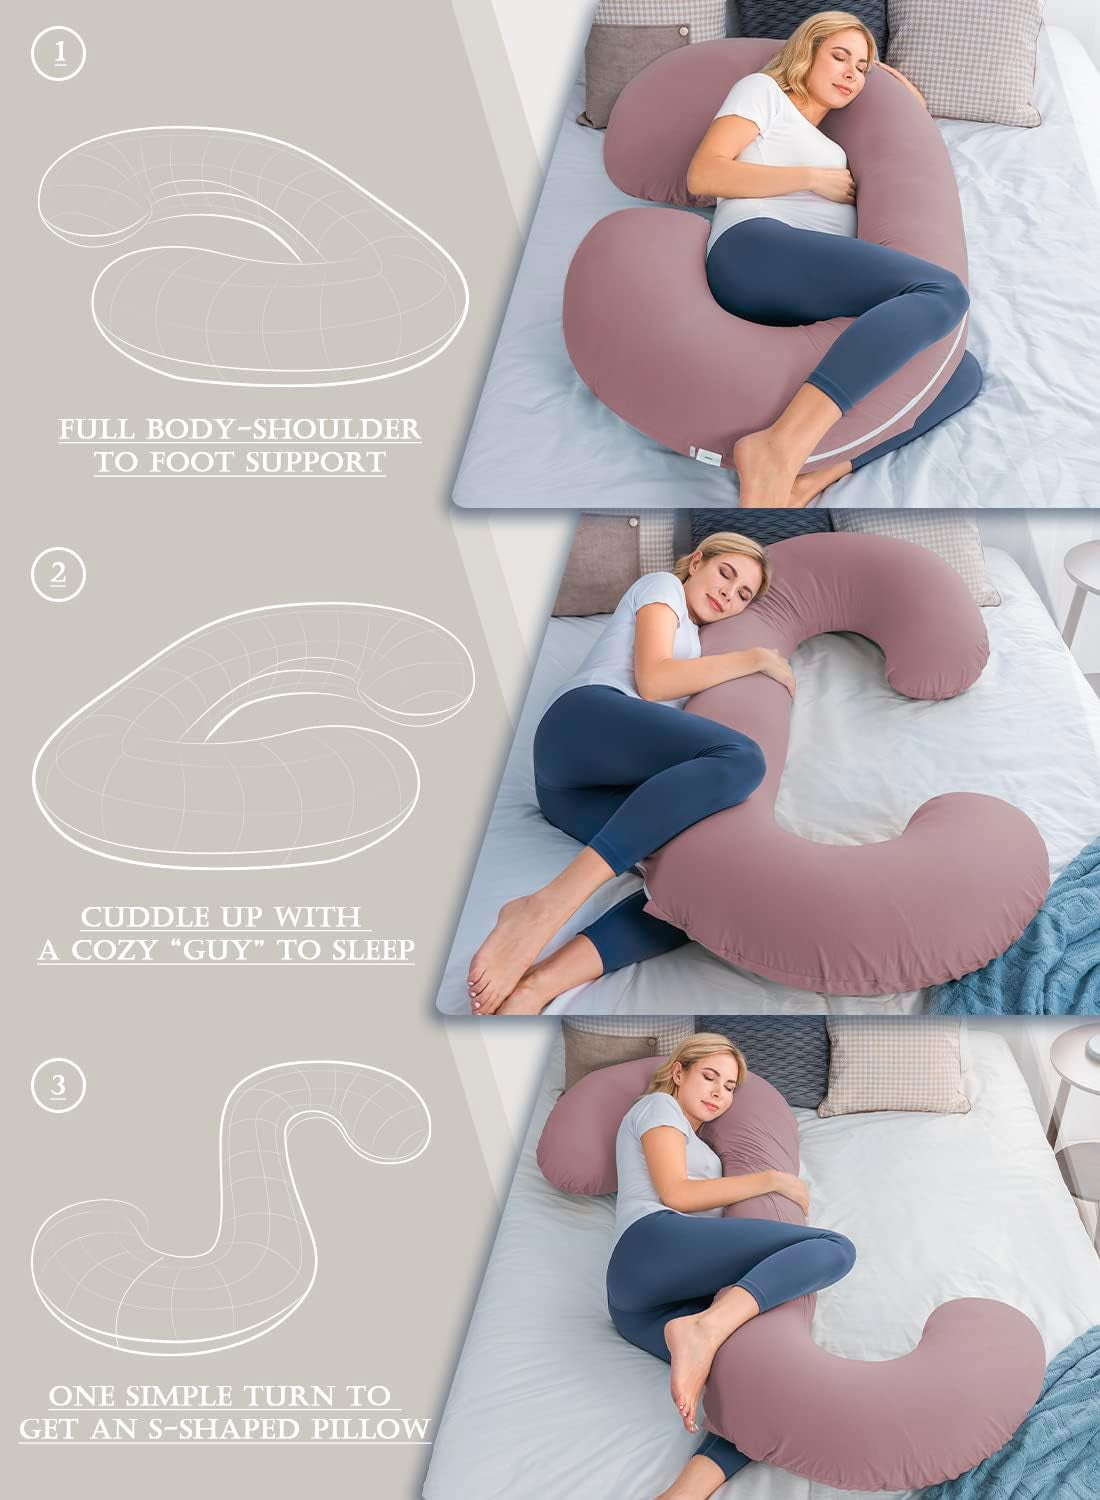 Pregnancy Pillow,Maternity Body Pillow with Velvet Cover,C Shaped Body Pillow for Sleeping (Cooling Cotton-Pink)